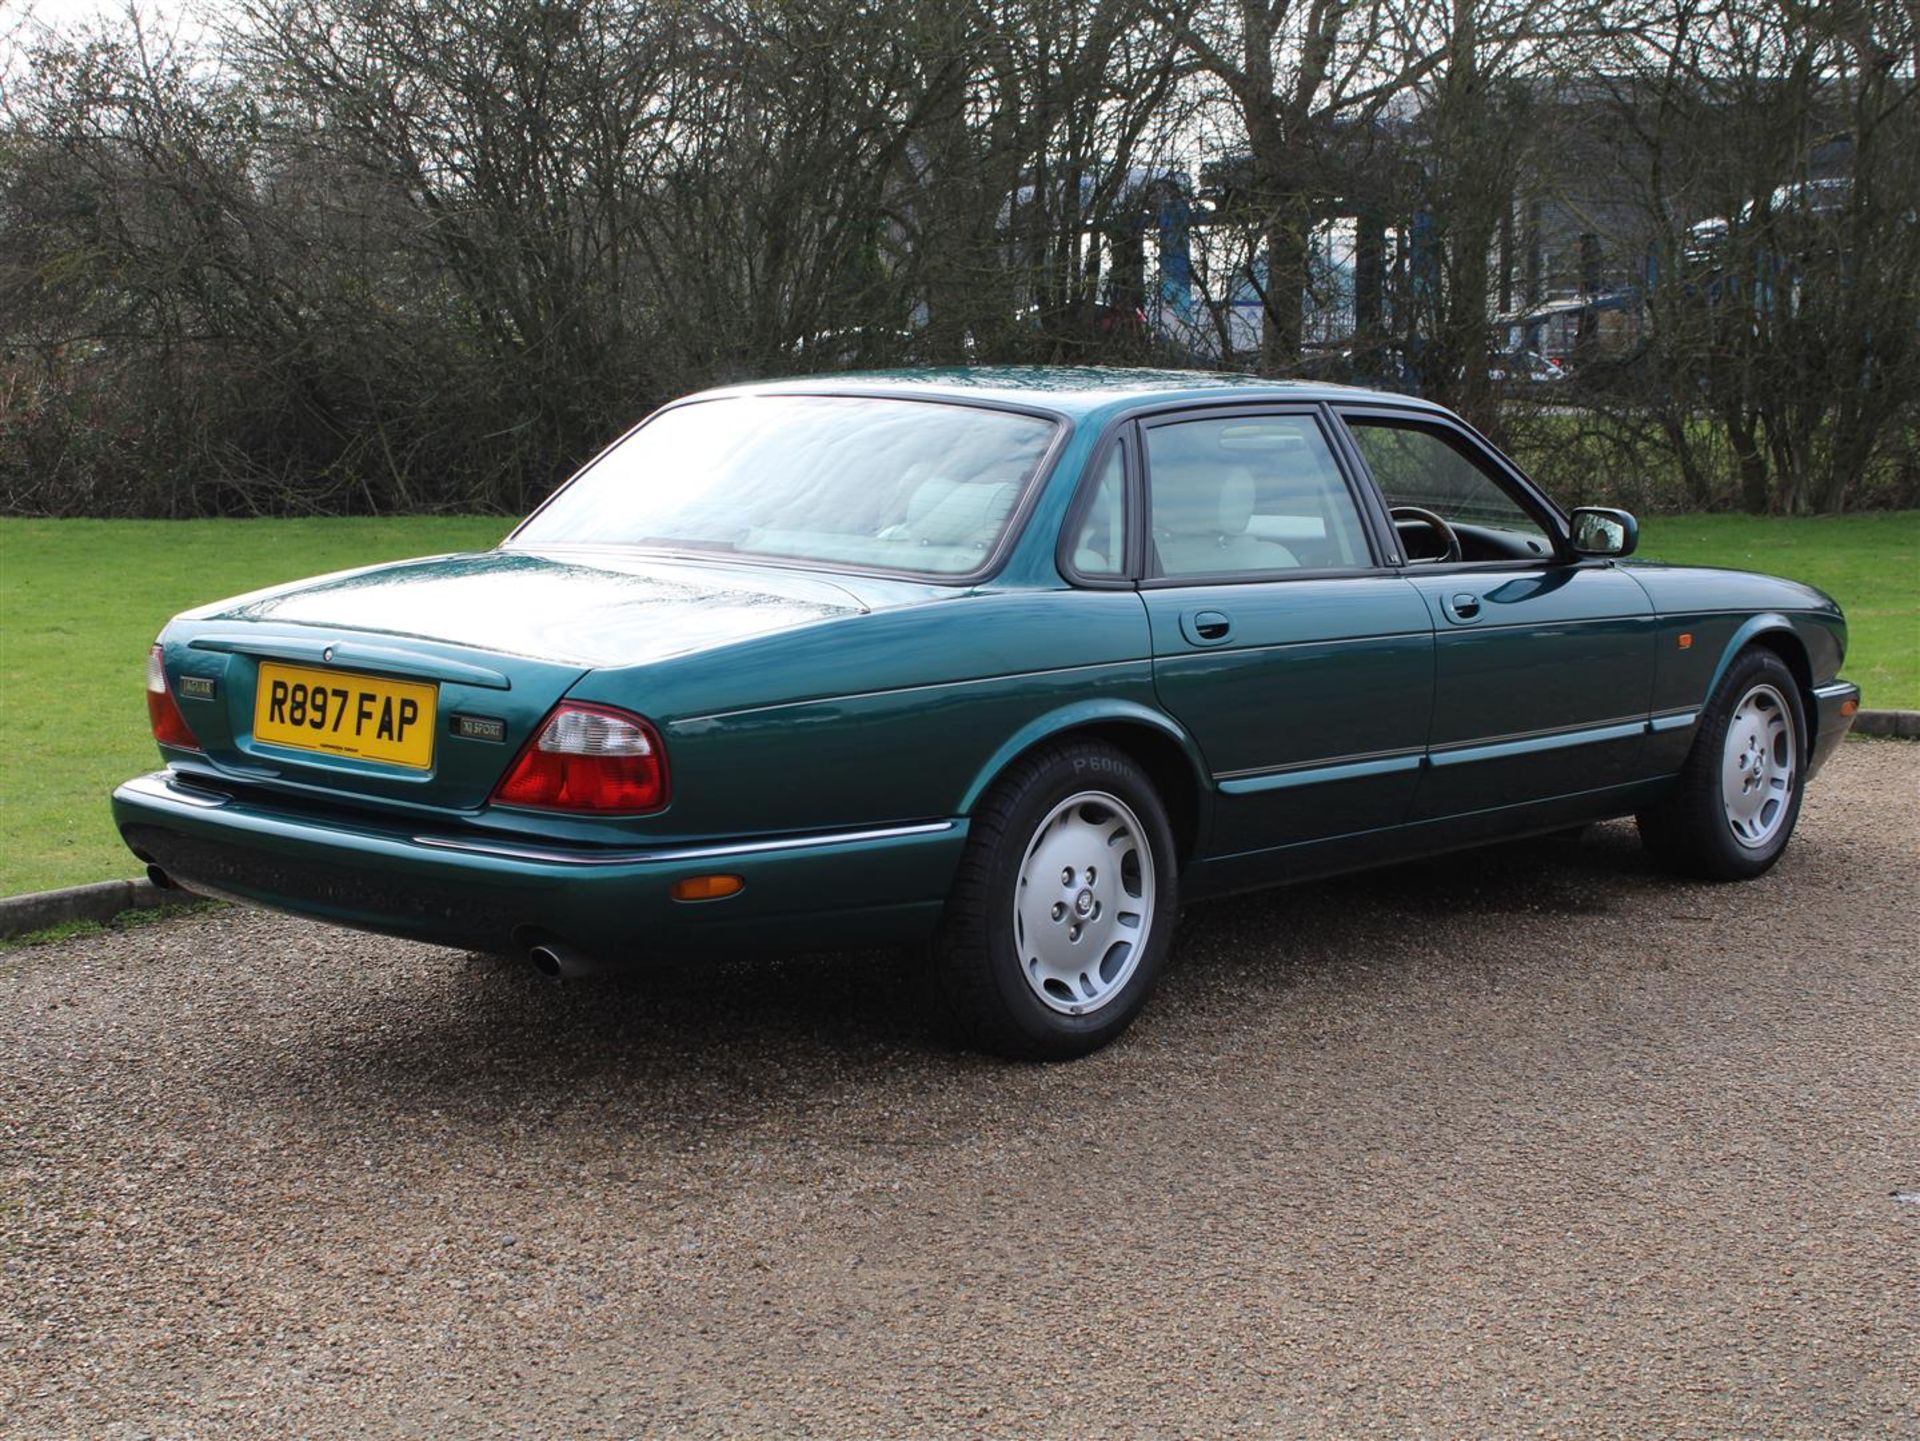 1997 Jaguar XJ Sport 3.2 V8 Auto 39,461 miles from new - Image 7 of 16